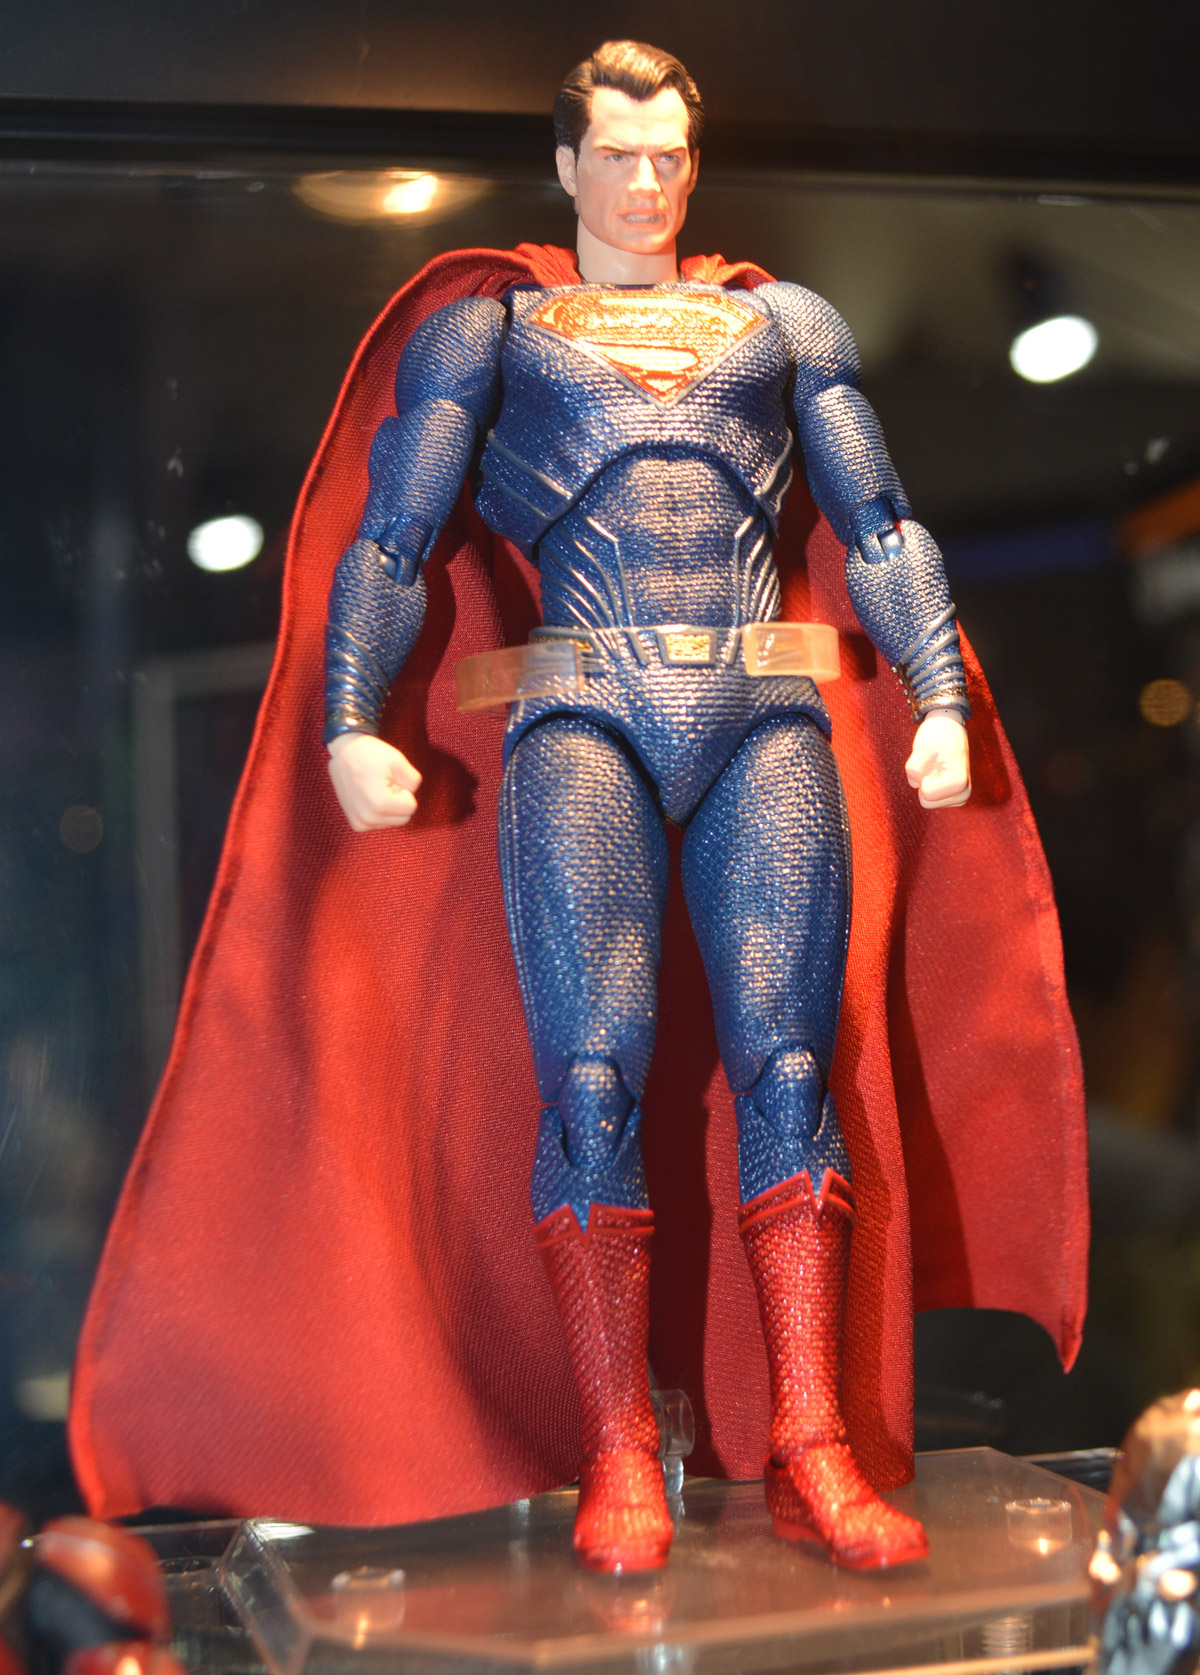 Justice League Movie MAFEX Figures Revealed At SDCC 2017 